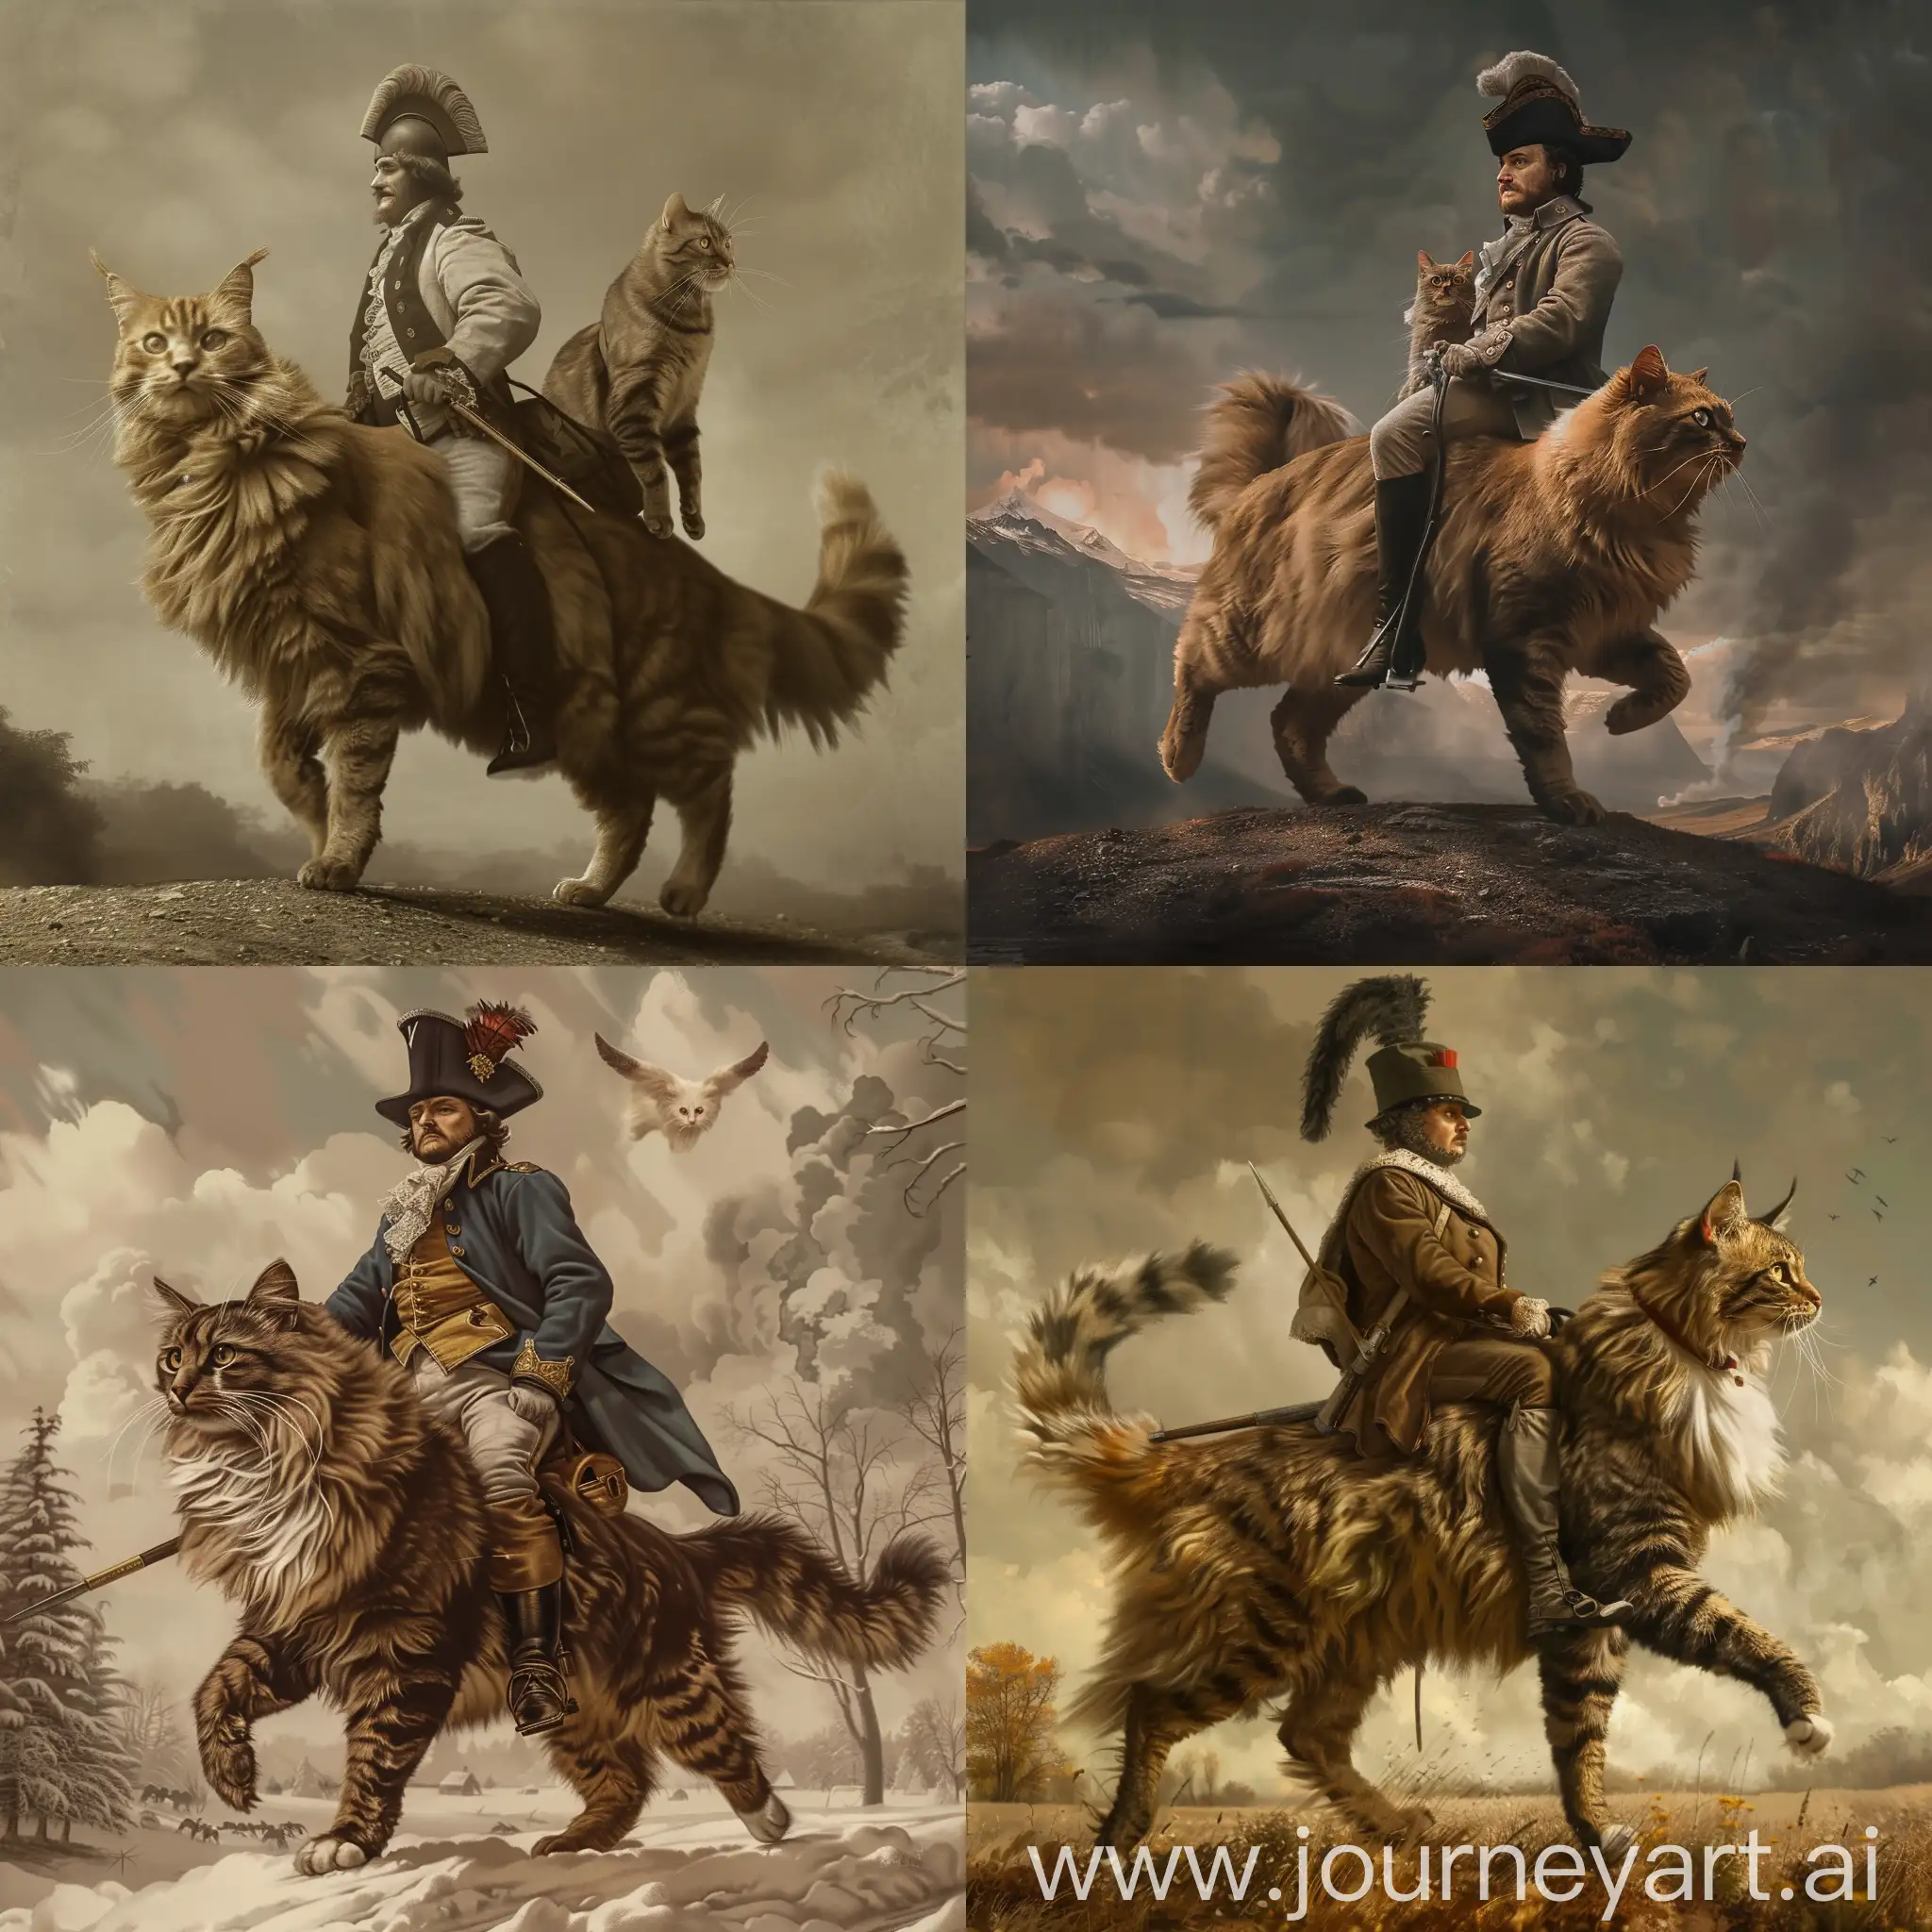 Napoleon-Riding-Maine-Coon-Cat-to-War-in-Realistic-Vintage-Art